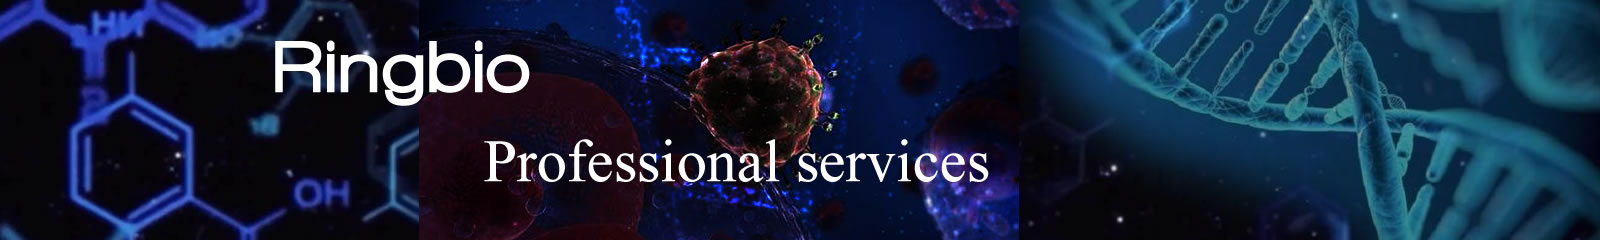 Professional Services from Ringbio